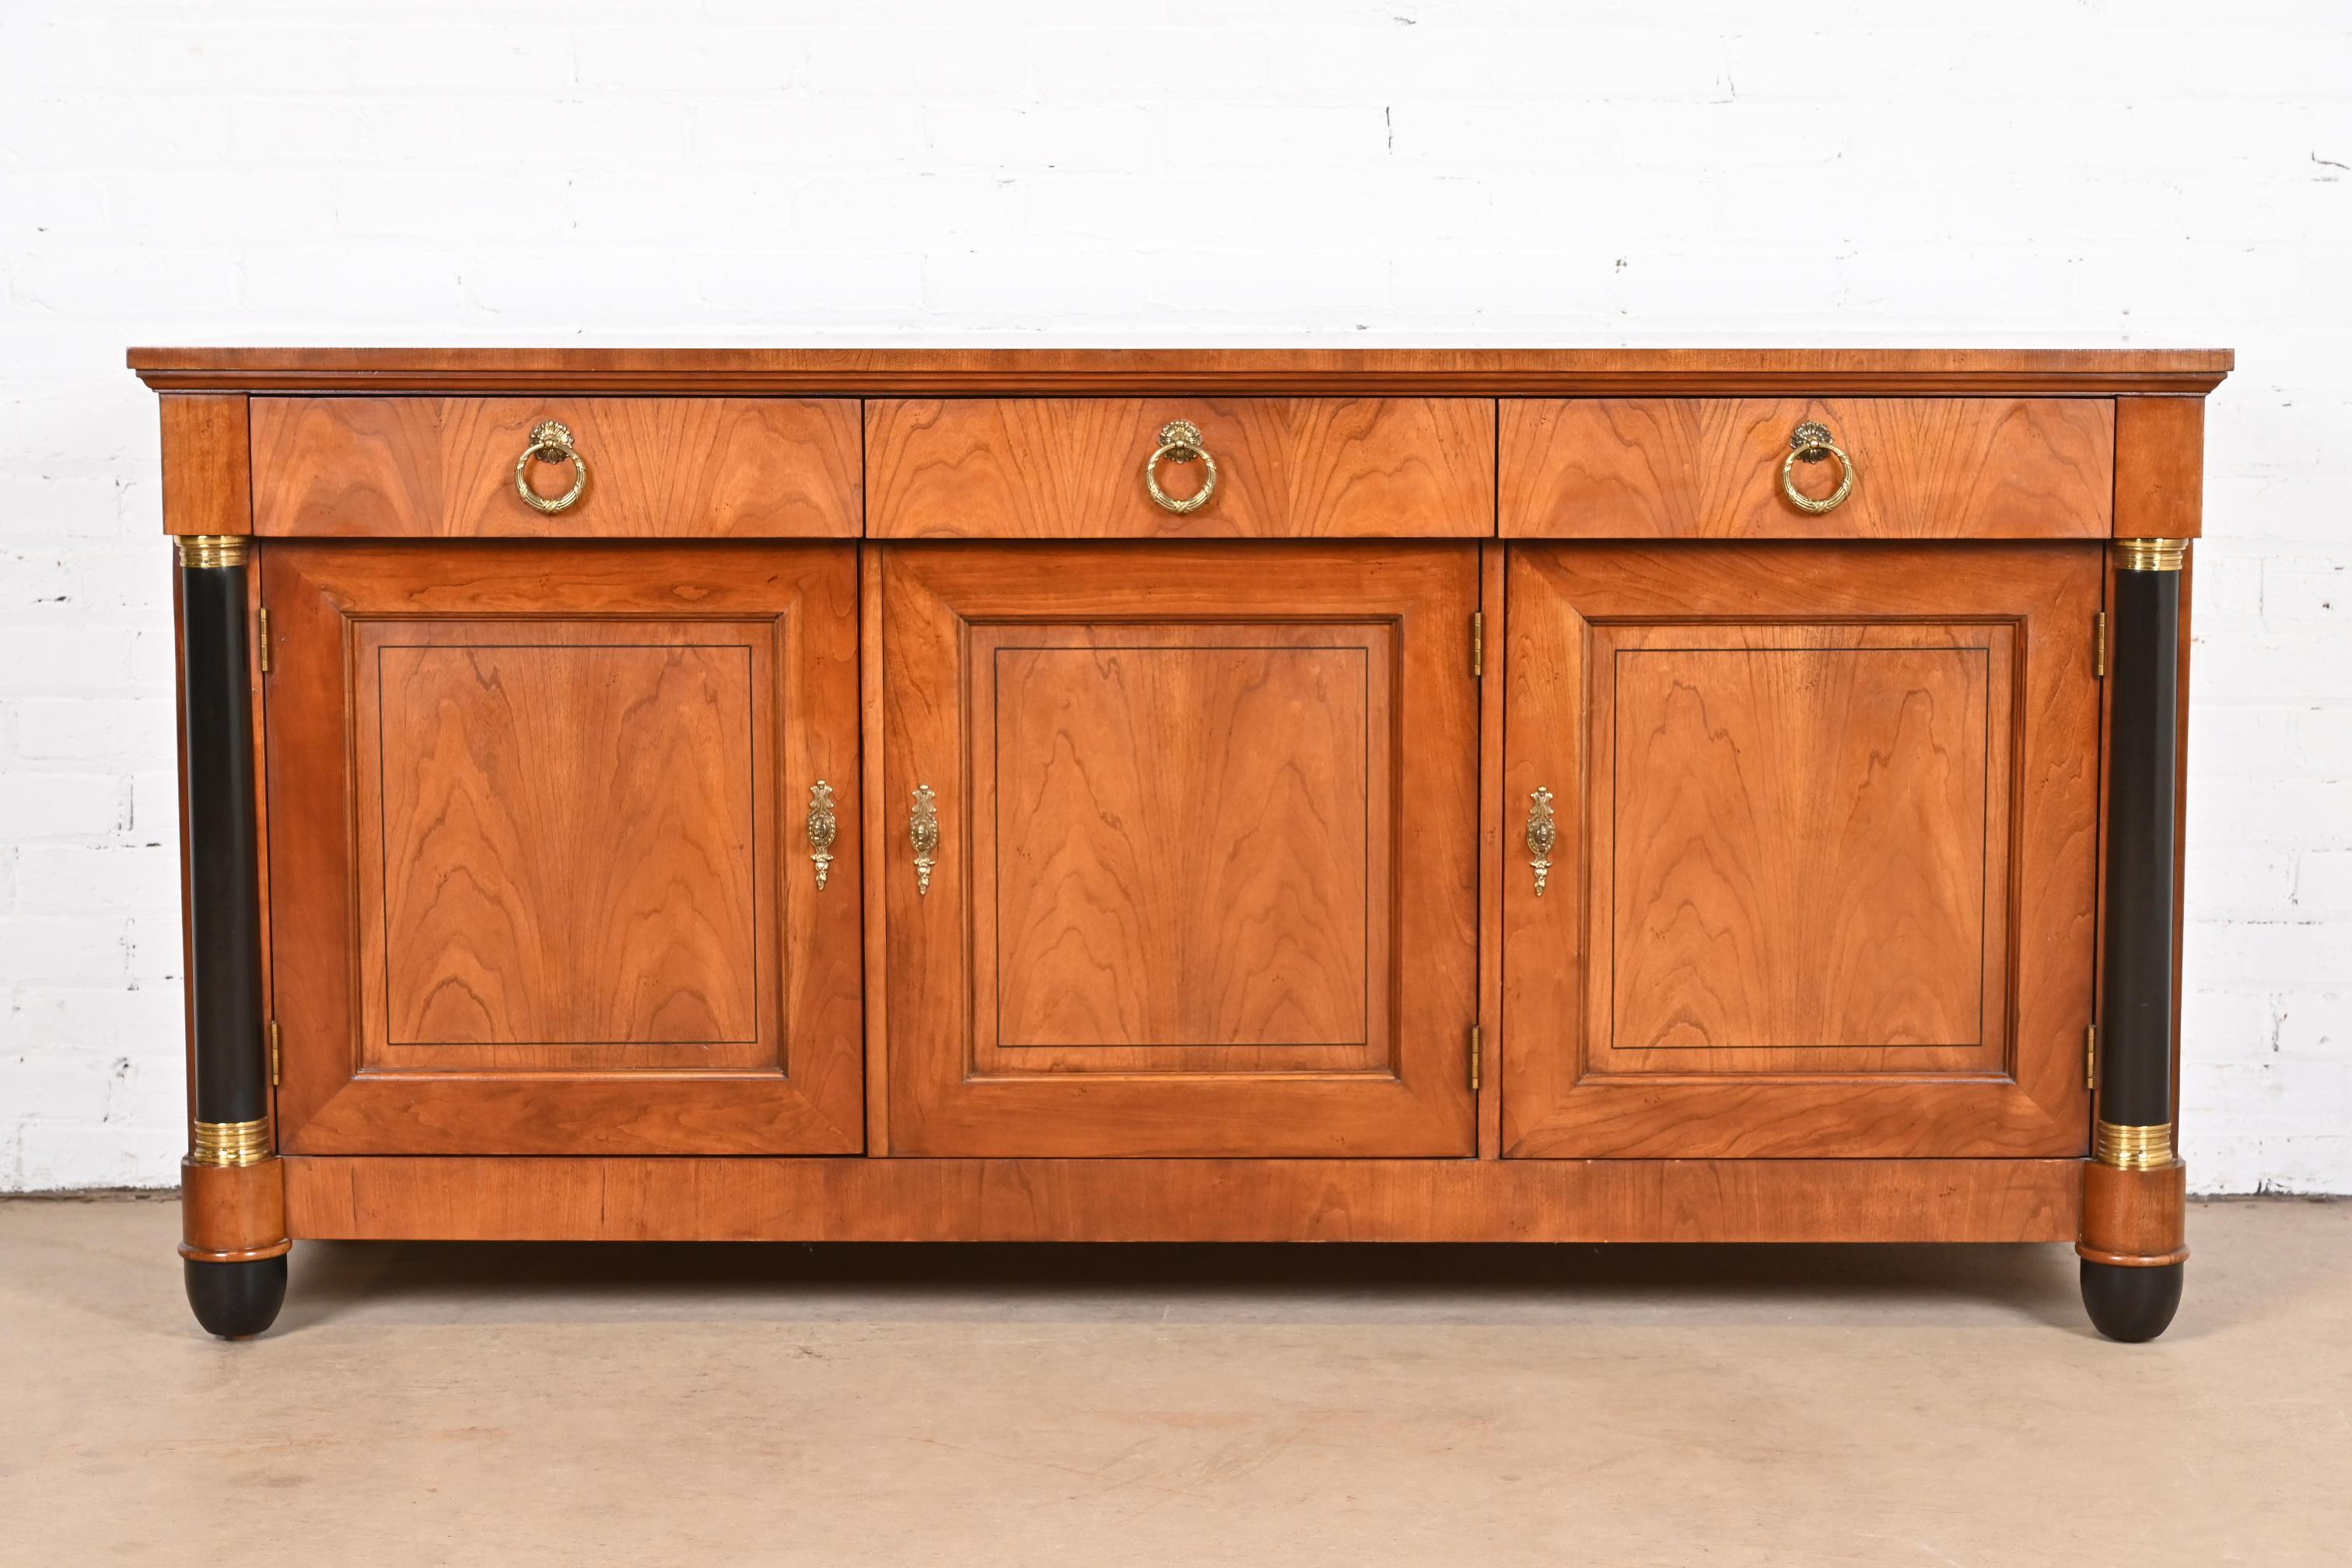 American Baker Furniture Neoclassical Cherry Wood and Parcel Ebonized Sideboard Credenza